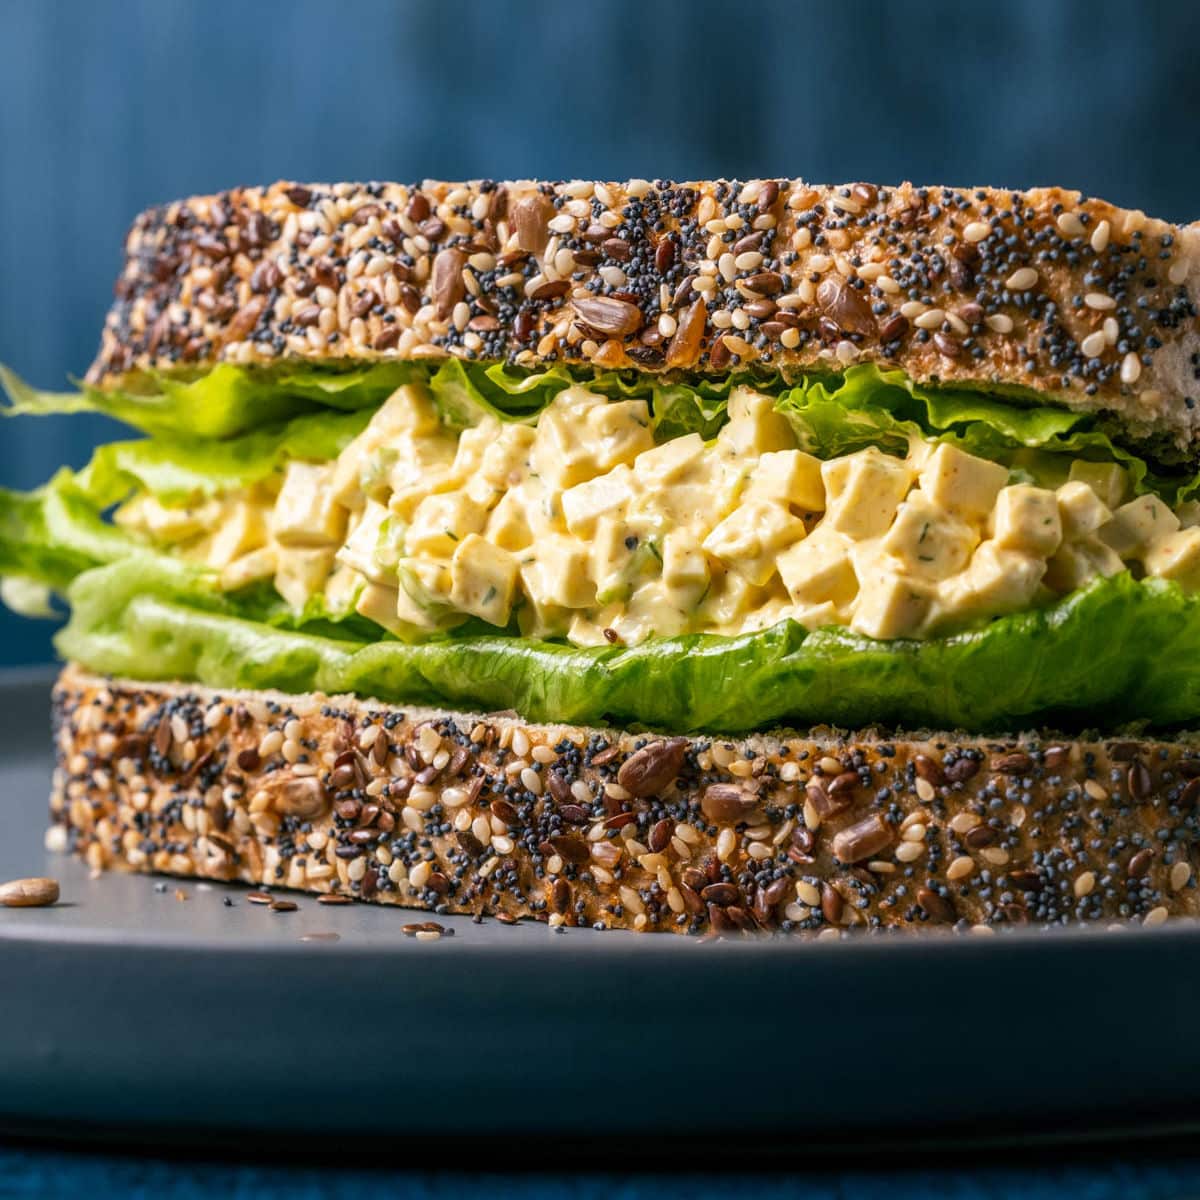 Best Avocado Egg Salad Toast - Cooking for Keeps